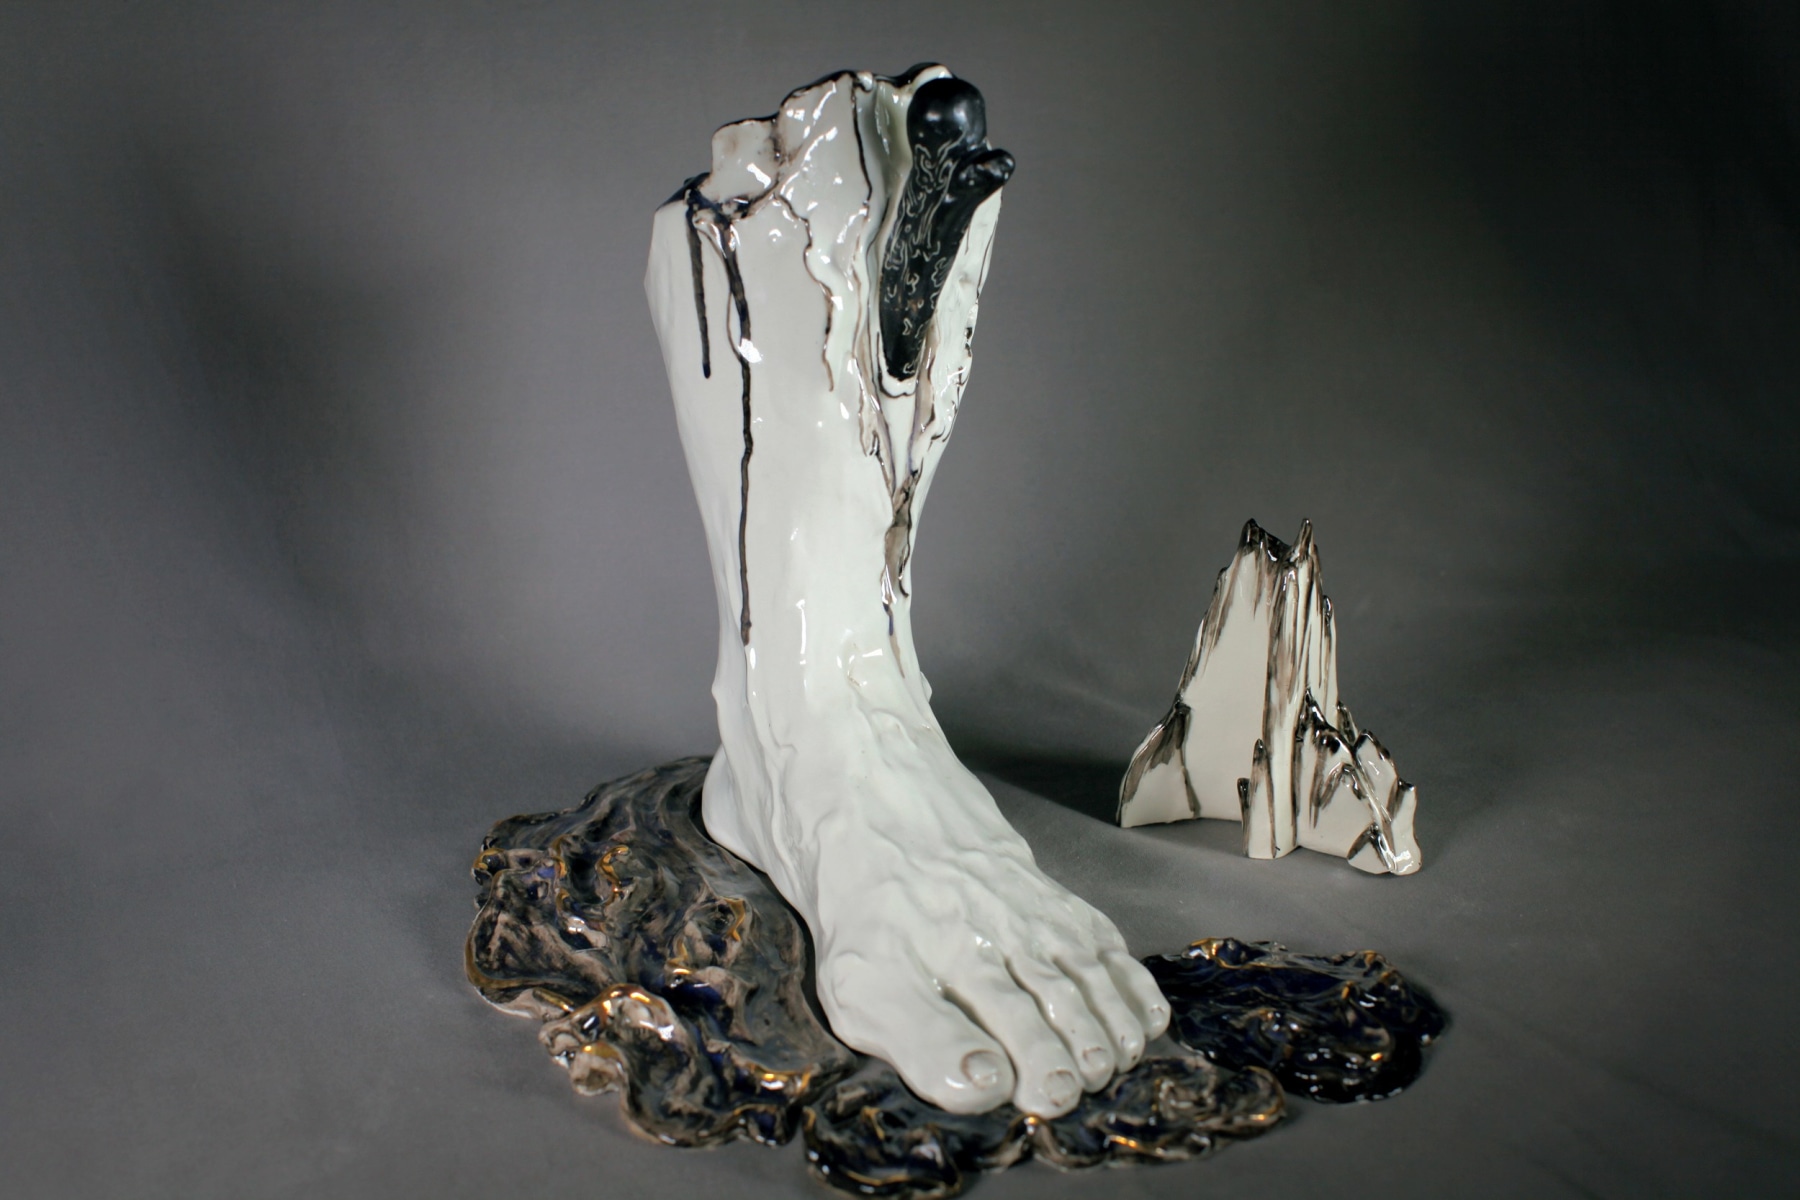 Geng_Xue_Solitary_Enlightened_One_2_Porcelain_40x45x40cm_2016